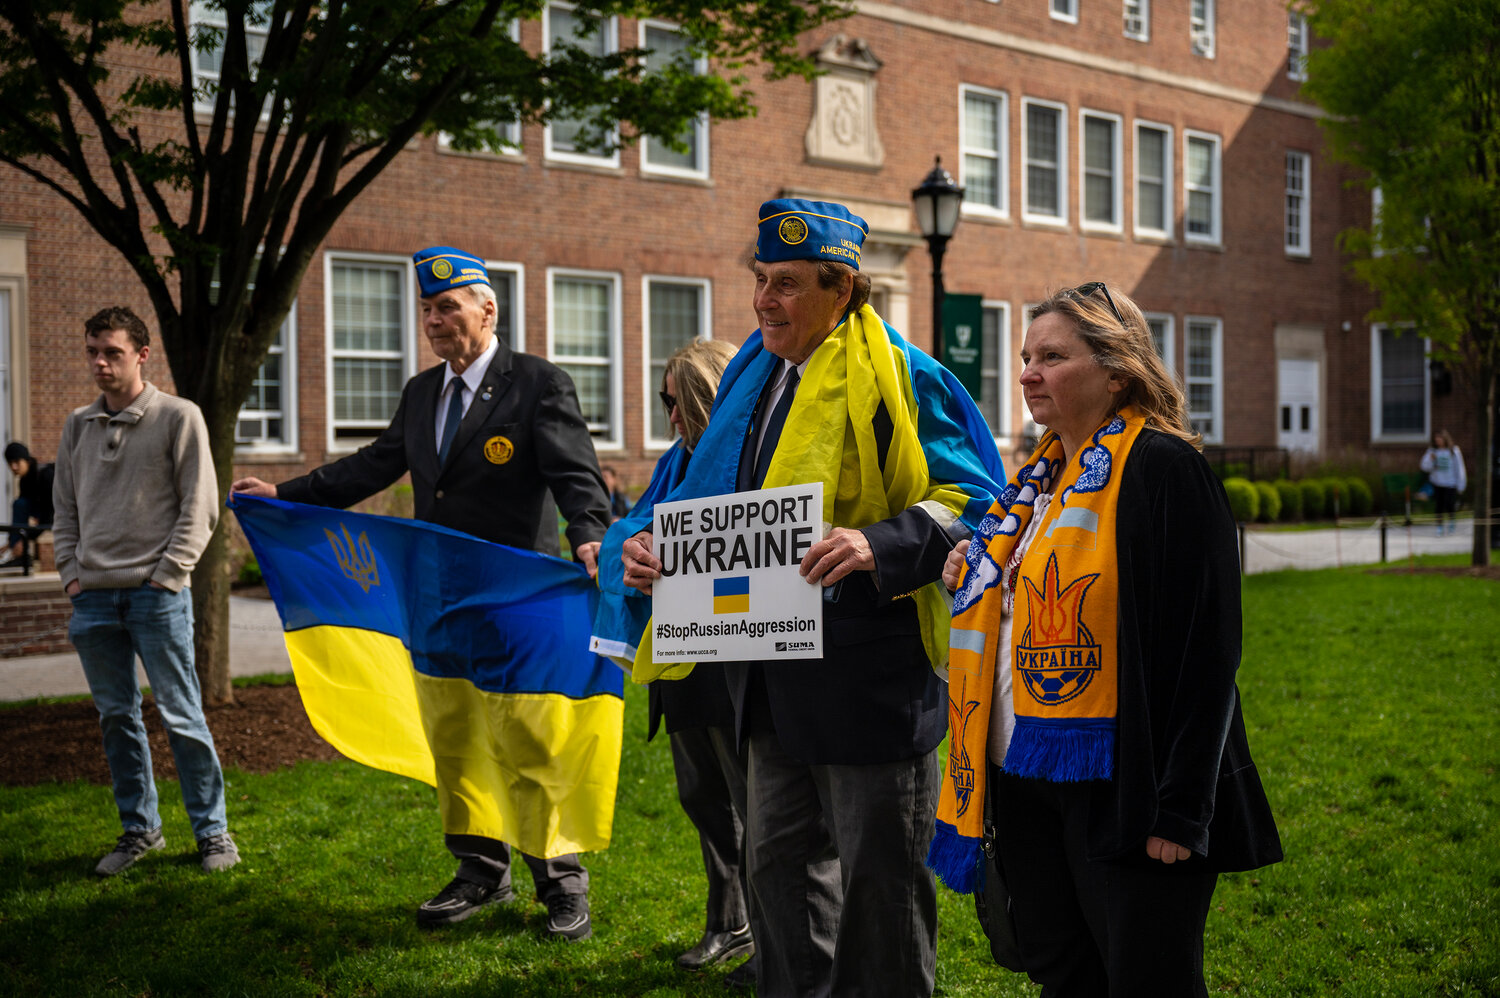 Ukrainian-American veterans stand with Ukrainian pride wearing the country’s colors at the Manhattan College campus on Monday, May 1, to help spread the message of peace after over 400 days since Russia's invasion of Ukraine.